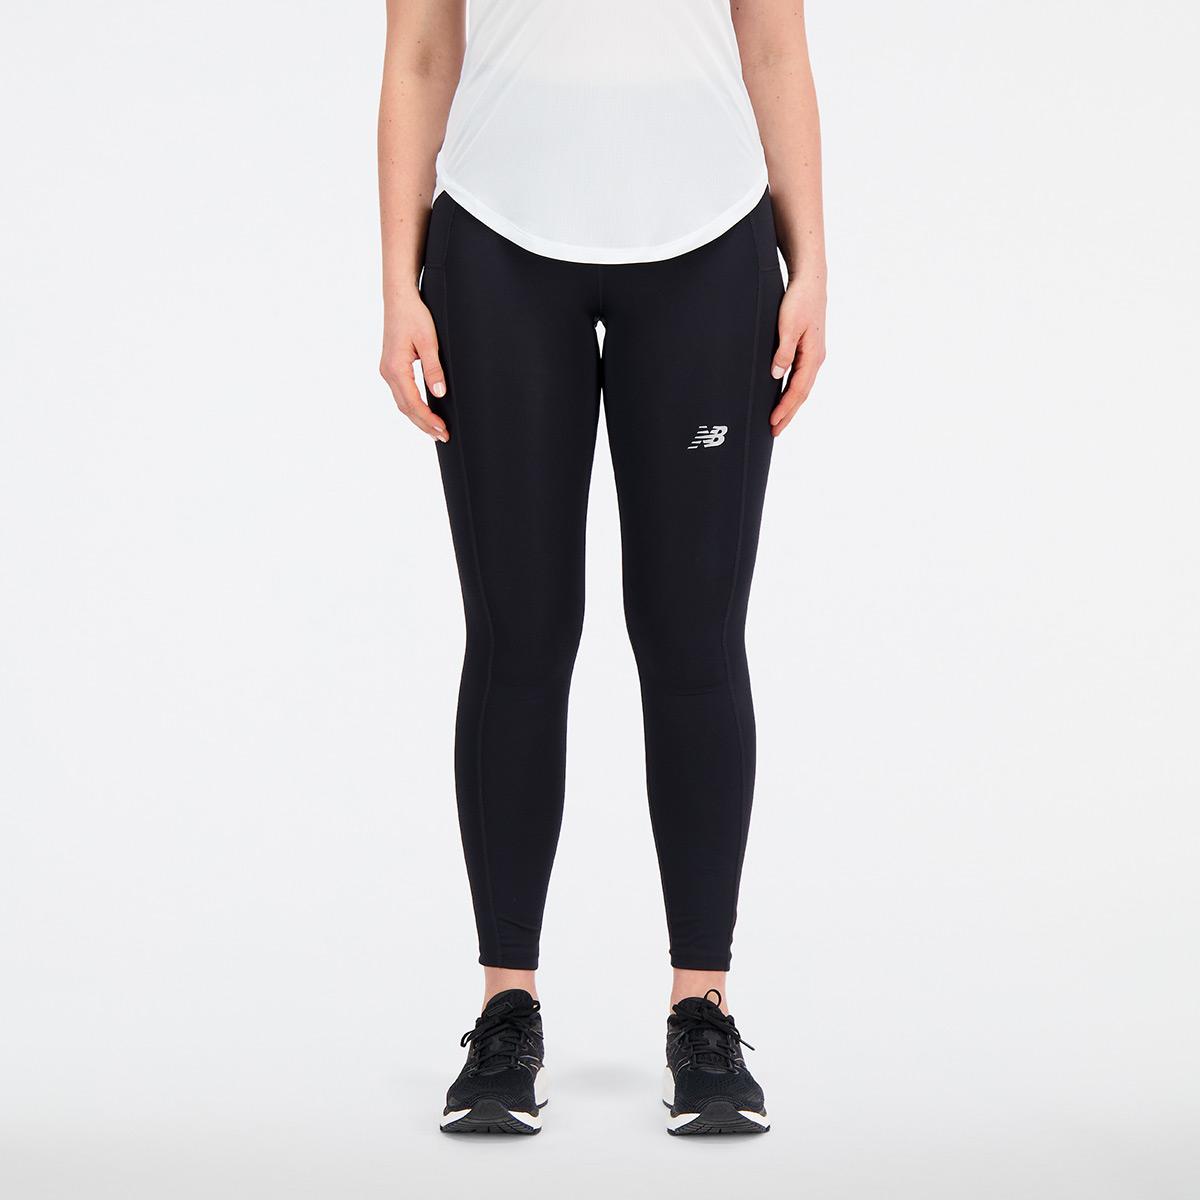 New Balance Womens Accelerate Pacer Tights - Black